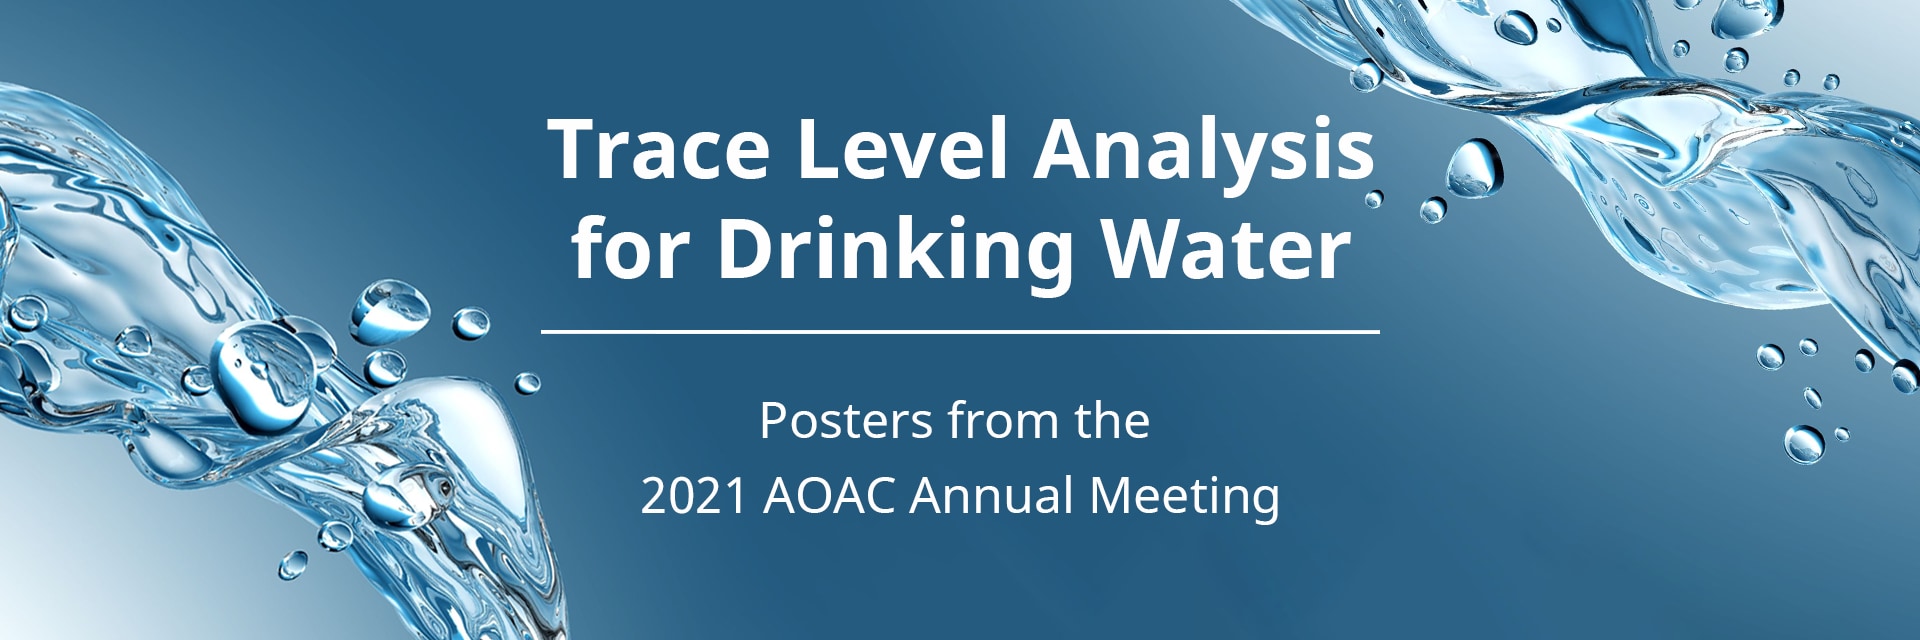 Trace Level Analysis for Drinking Water